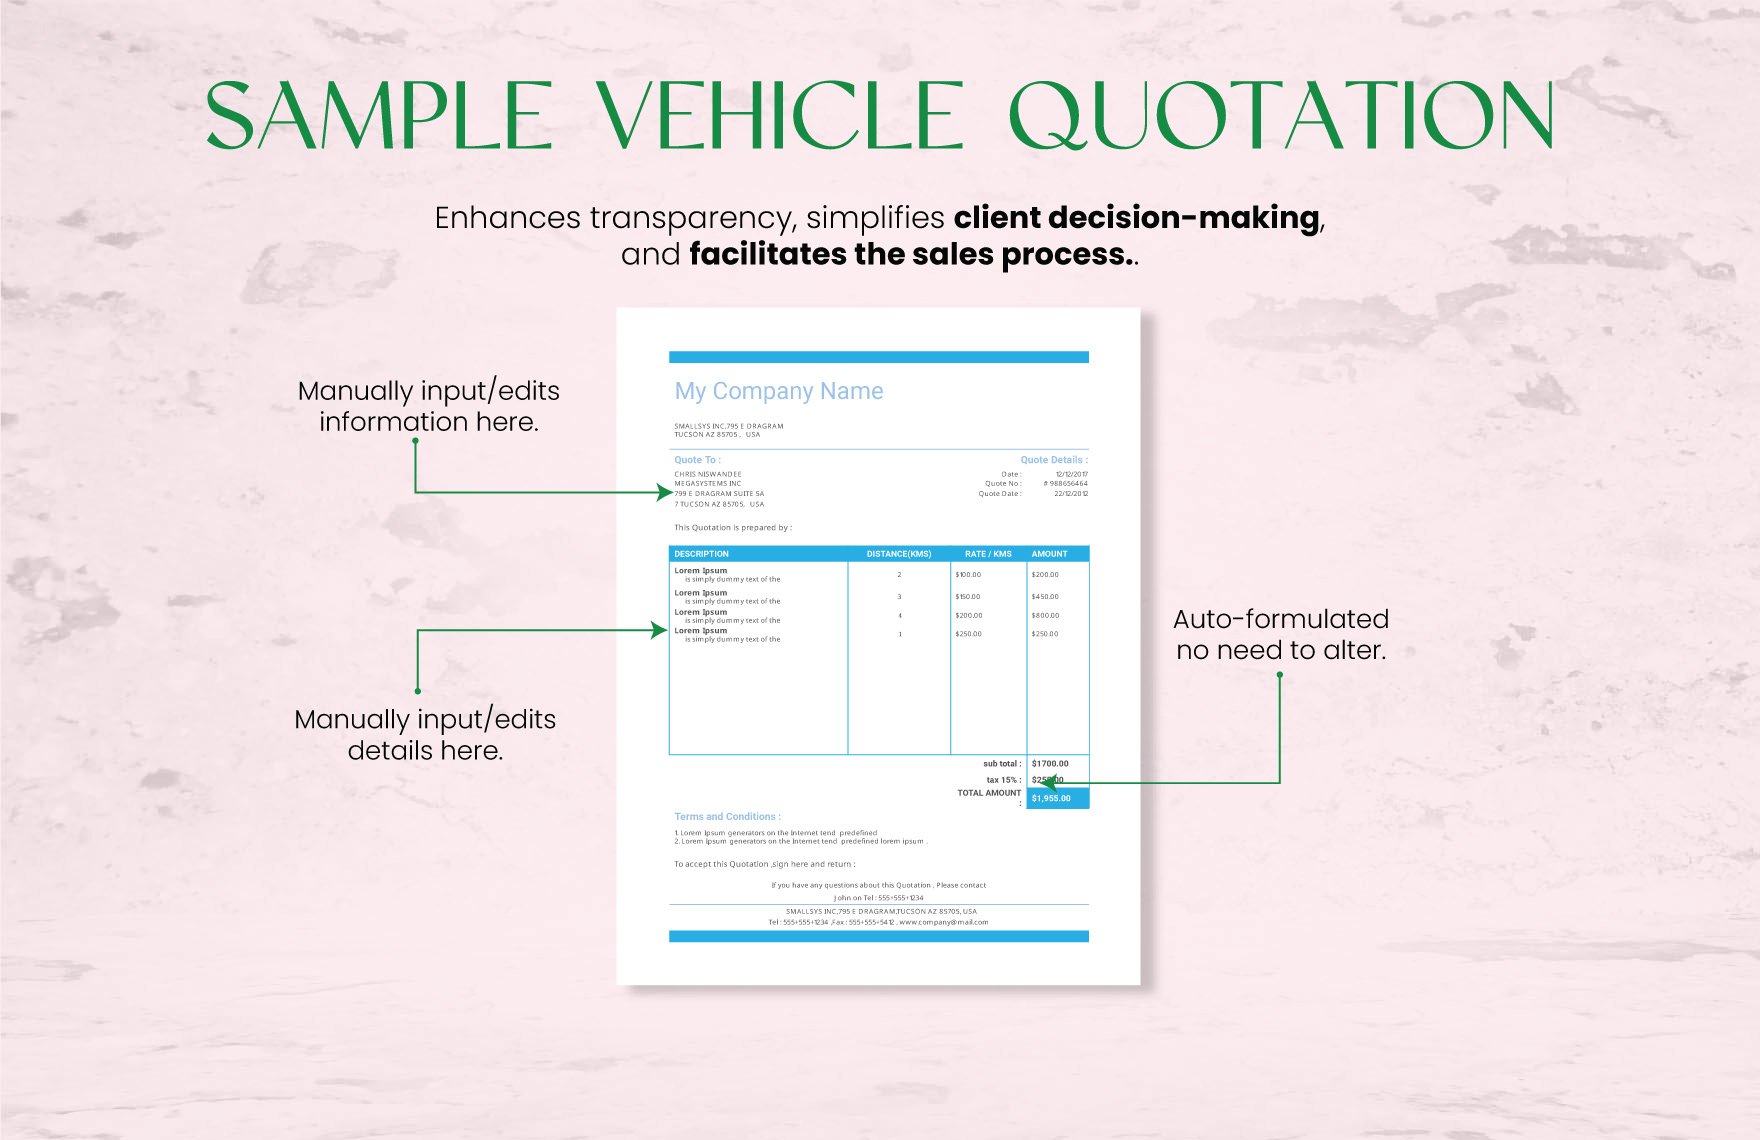 Sample Vehicle Quotation Template